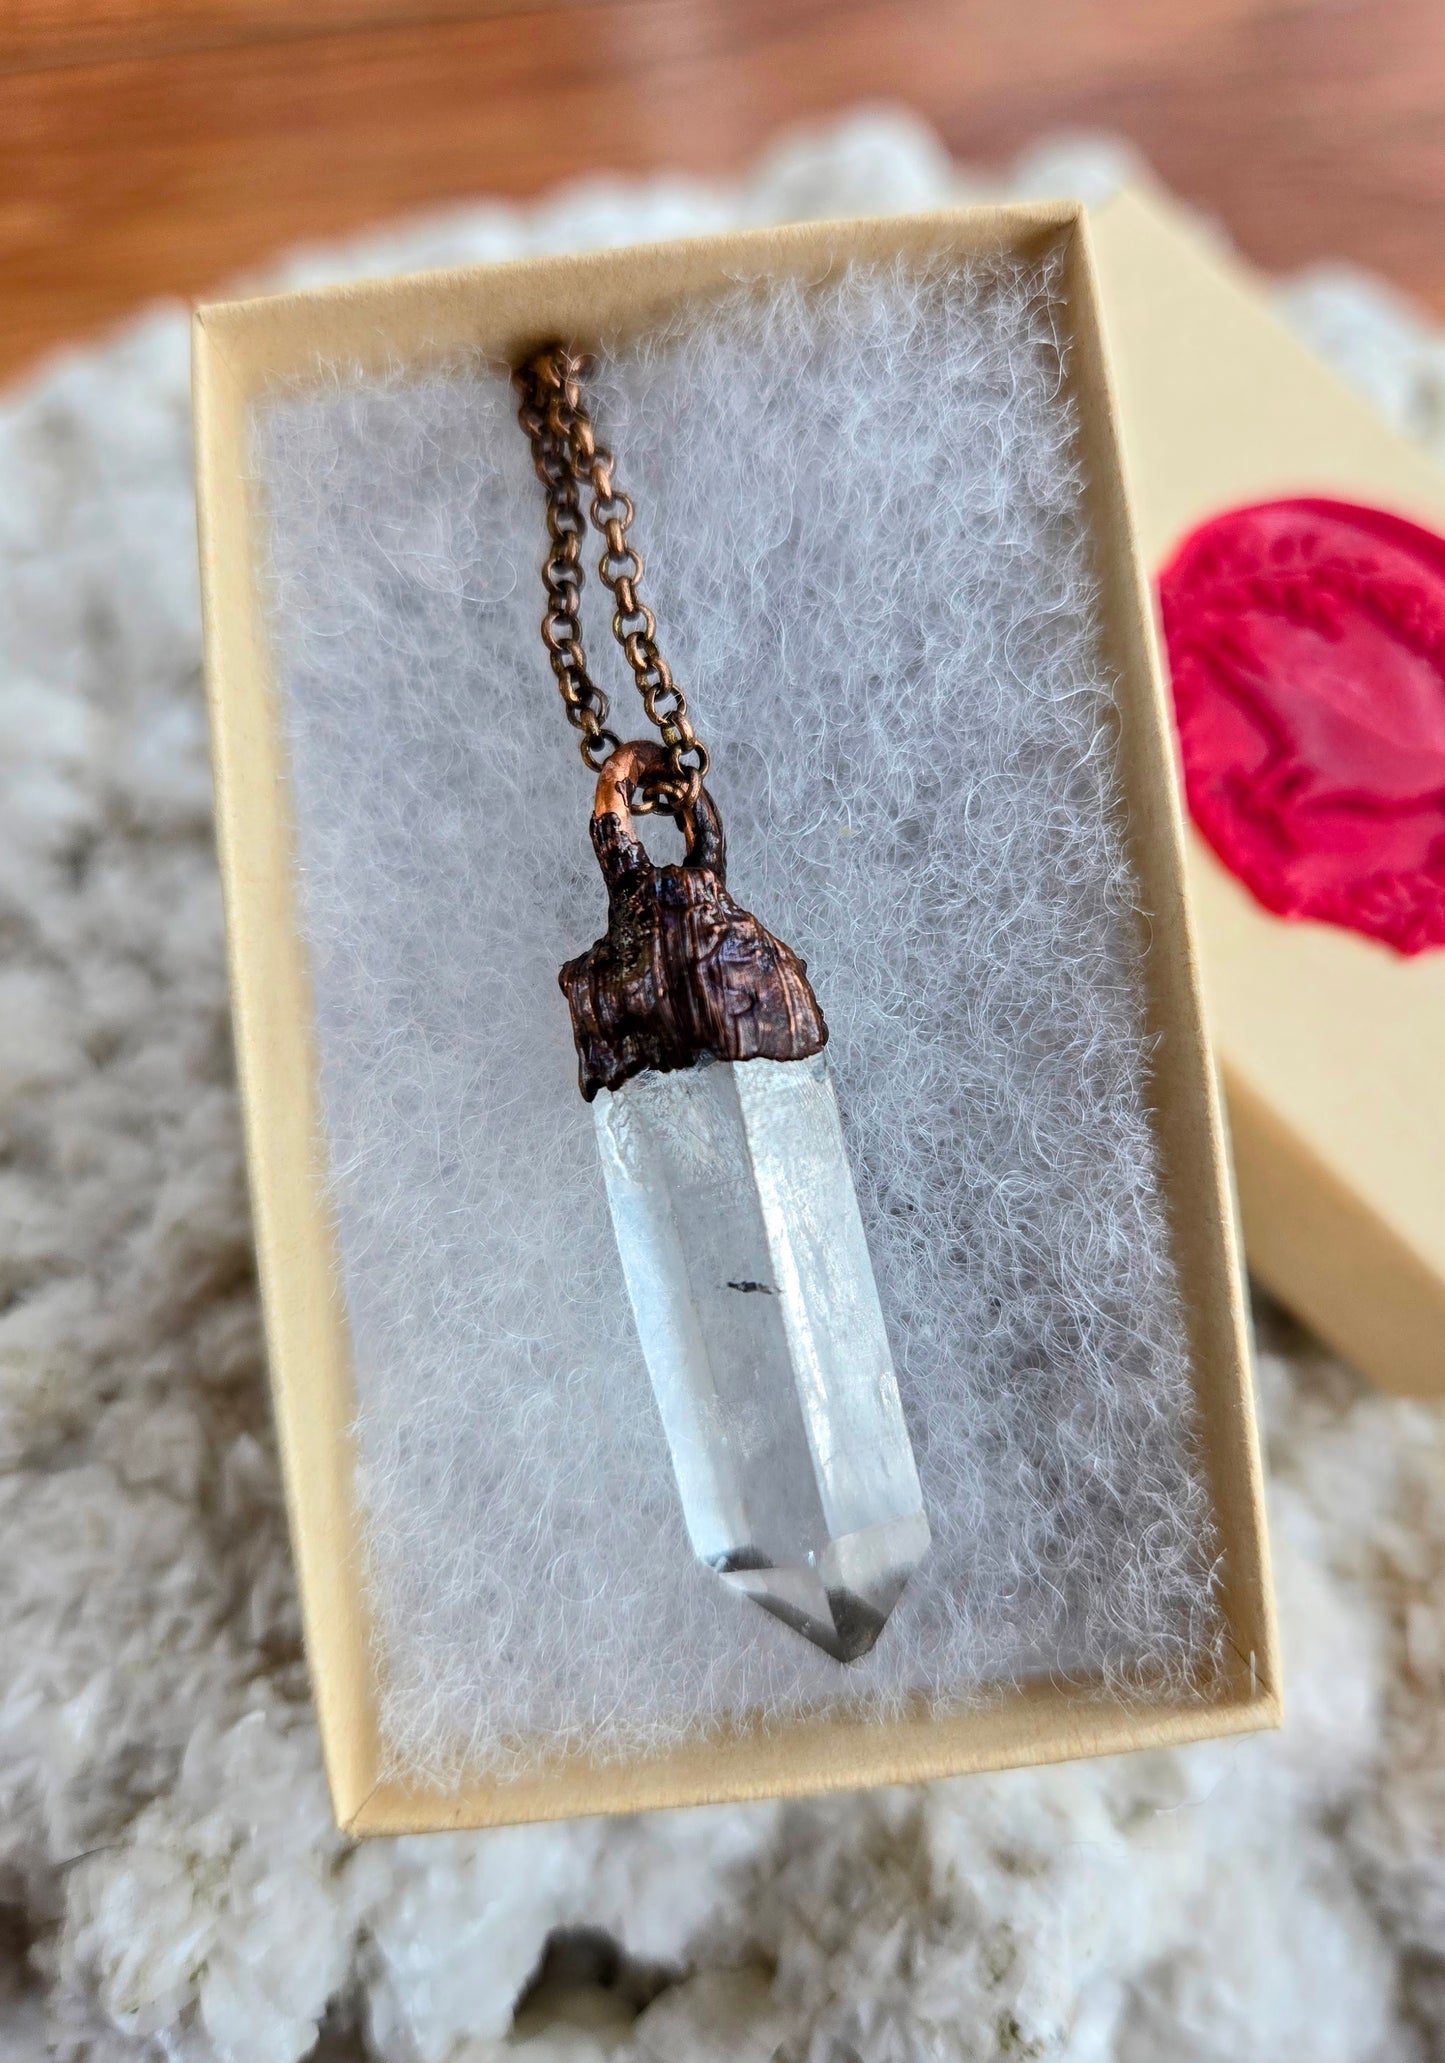 Clear Quartz with Copper Necklaces - Locally Made